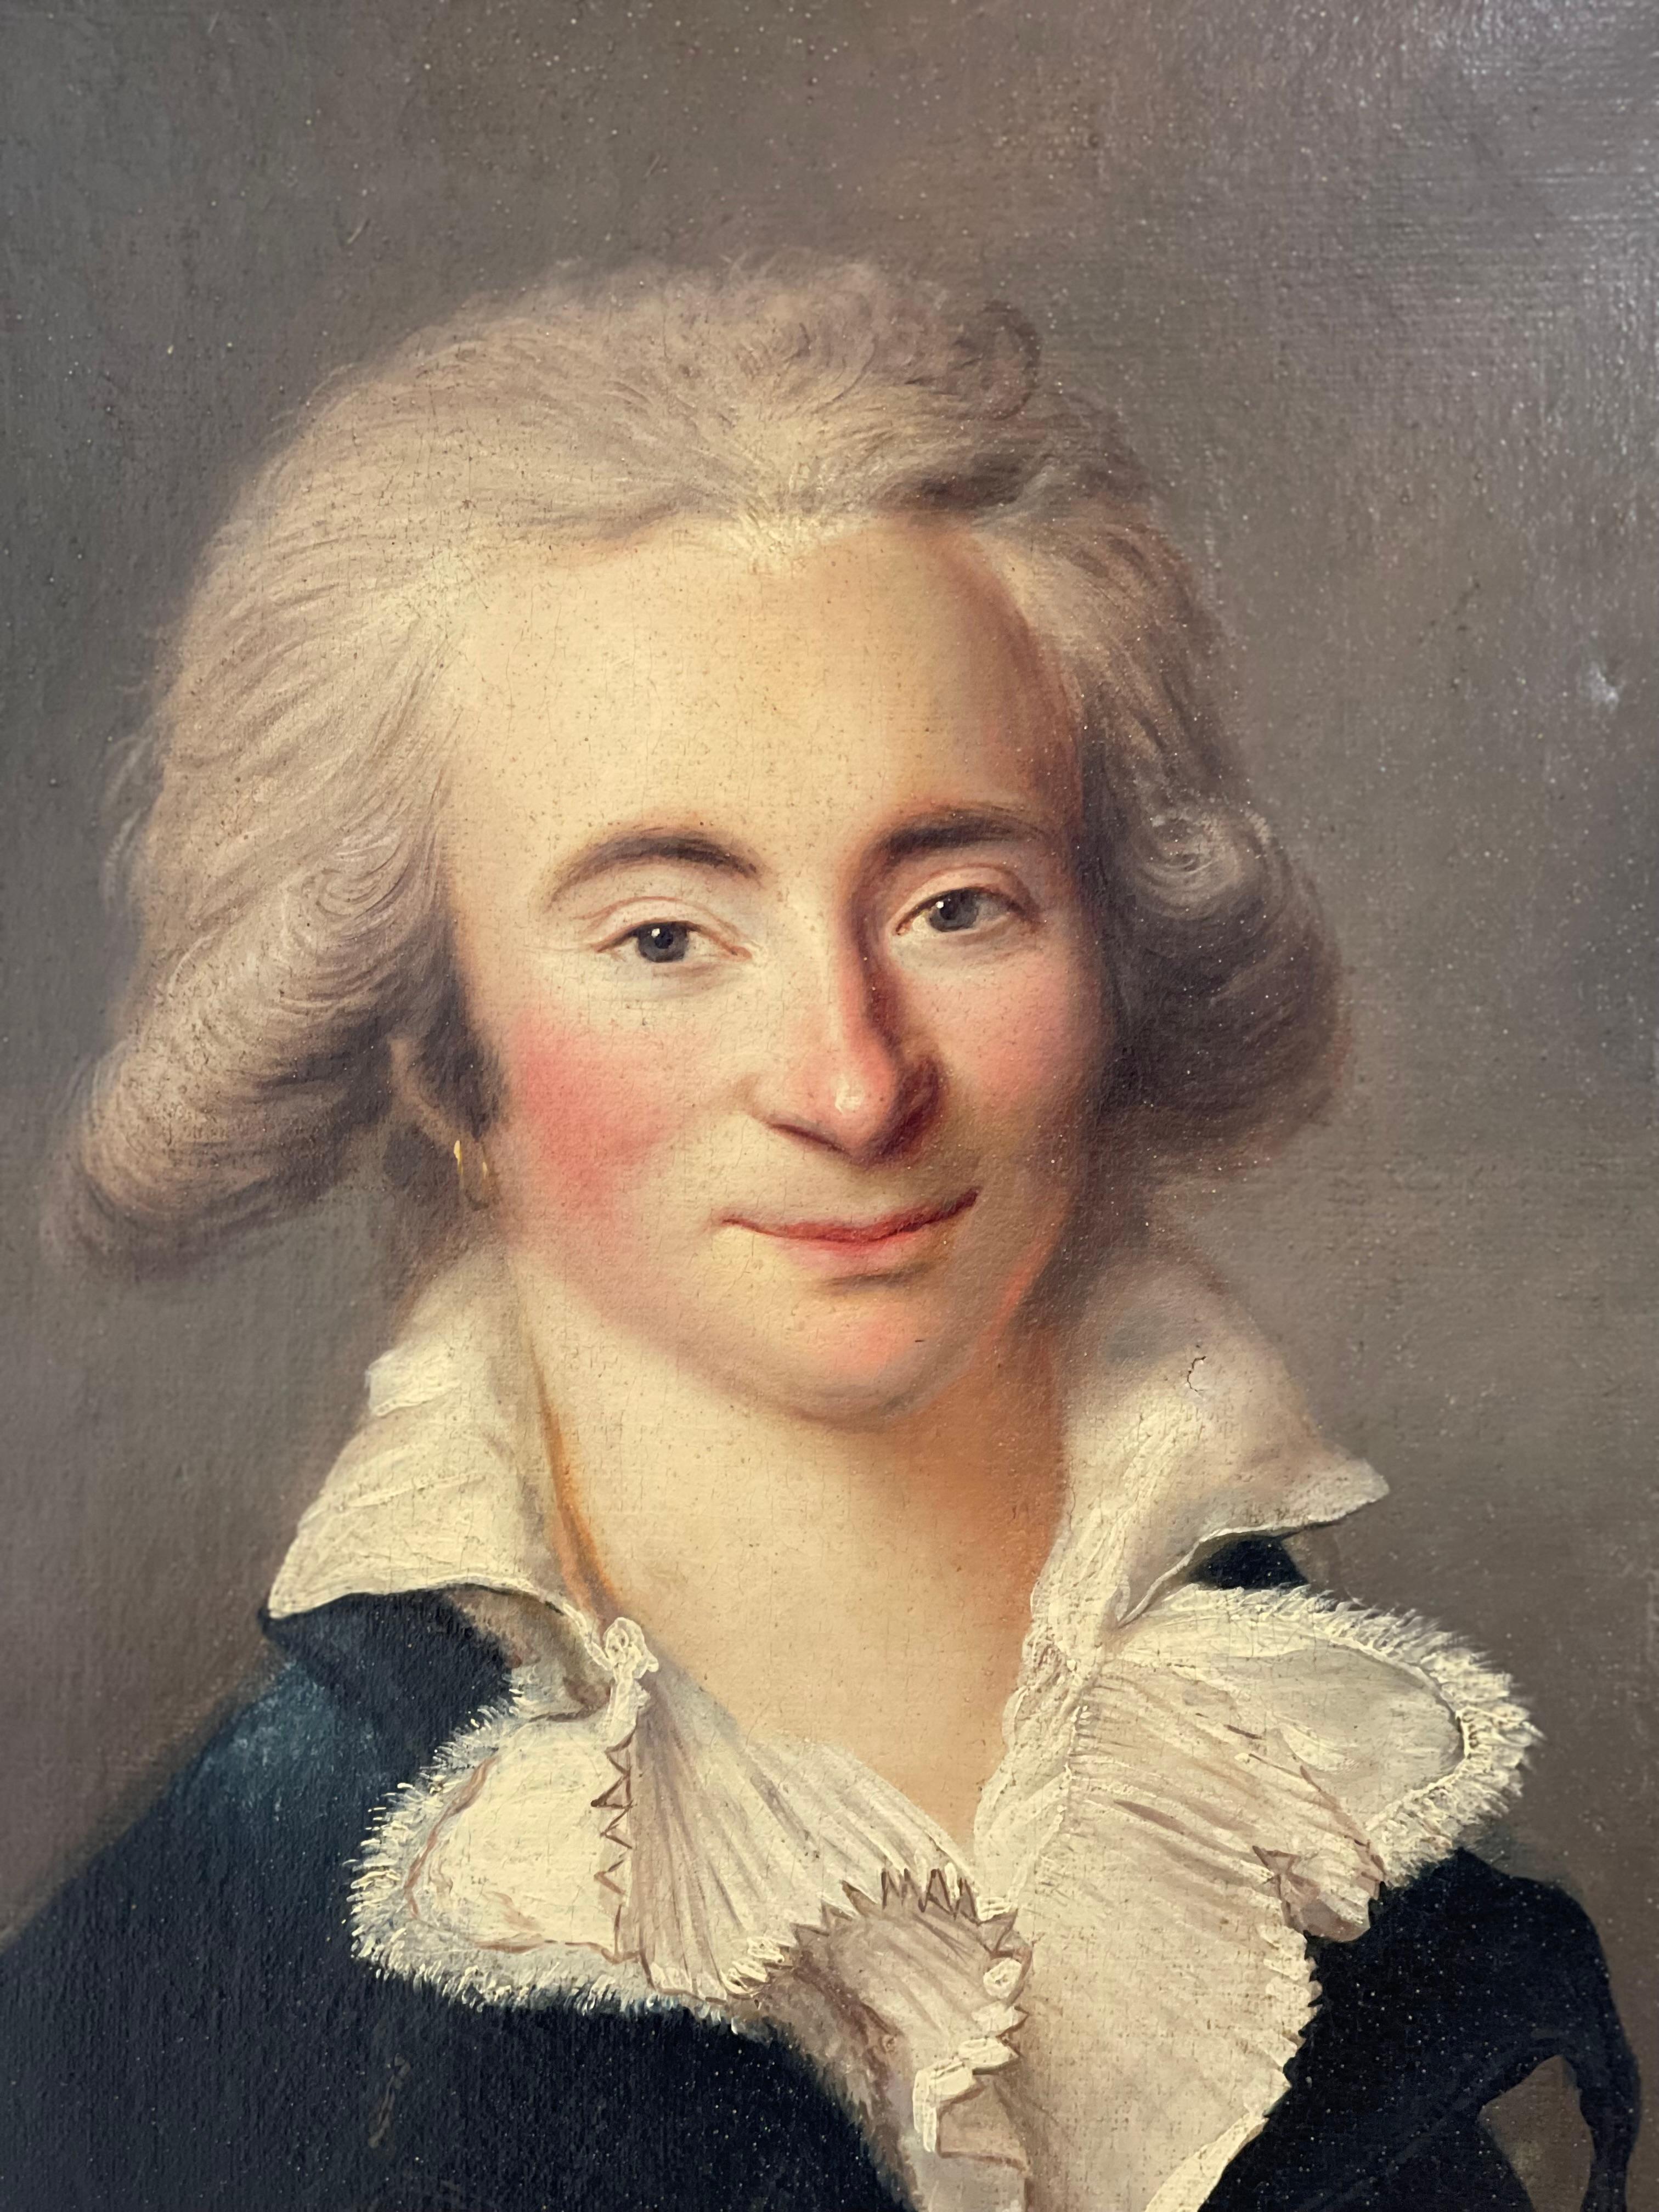 18th century oval portrait oil on canvas of an aristocrat

The individual with the mischievous look wears a highly voluminous powdered starch hairdo.
An earring on his ear is a rare example of coquetry in a picture.
His corner smile and brave